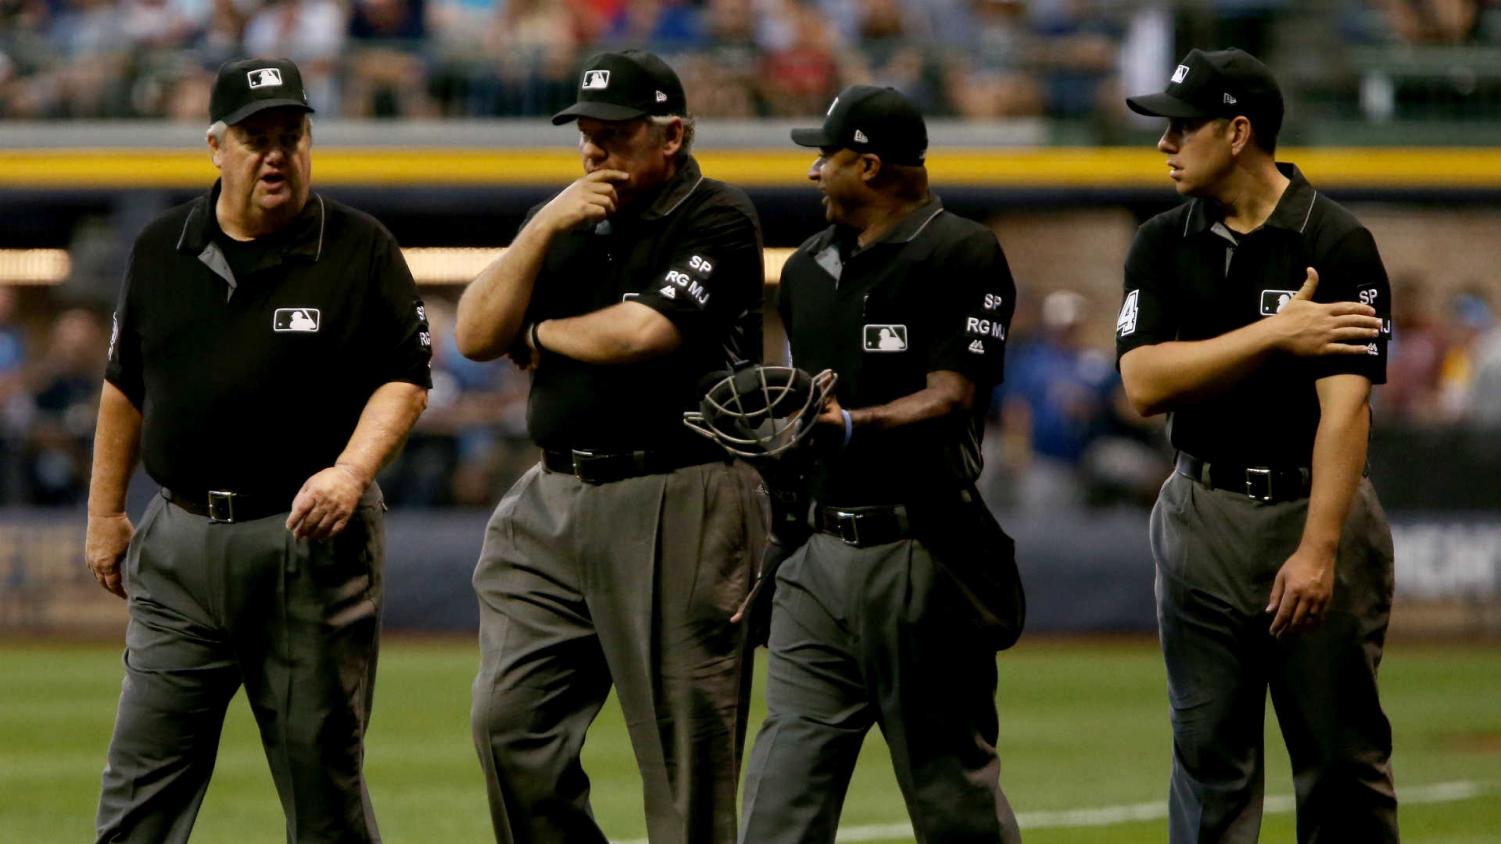 Robotic Umpires are coming to the MLB soon – Eagle News Network